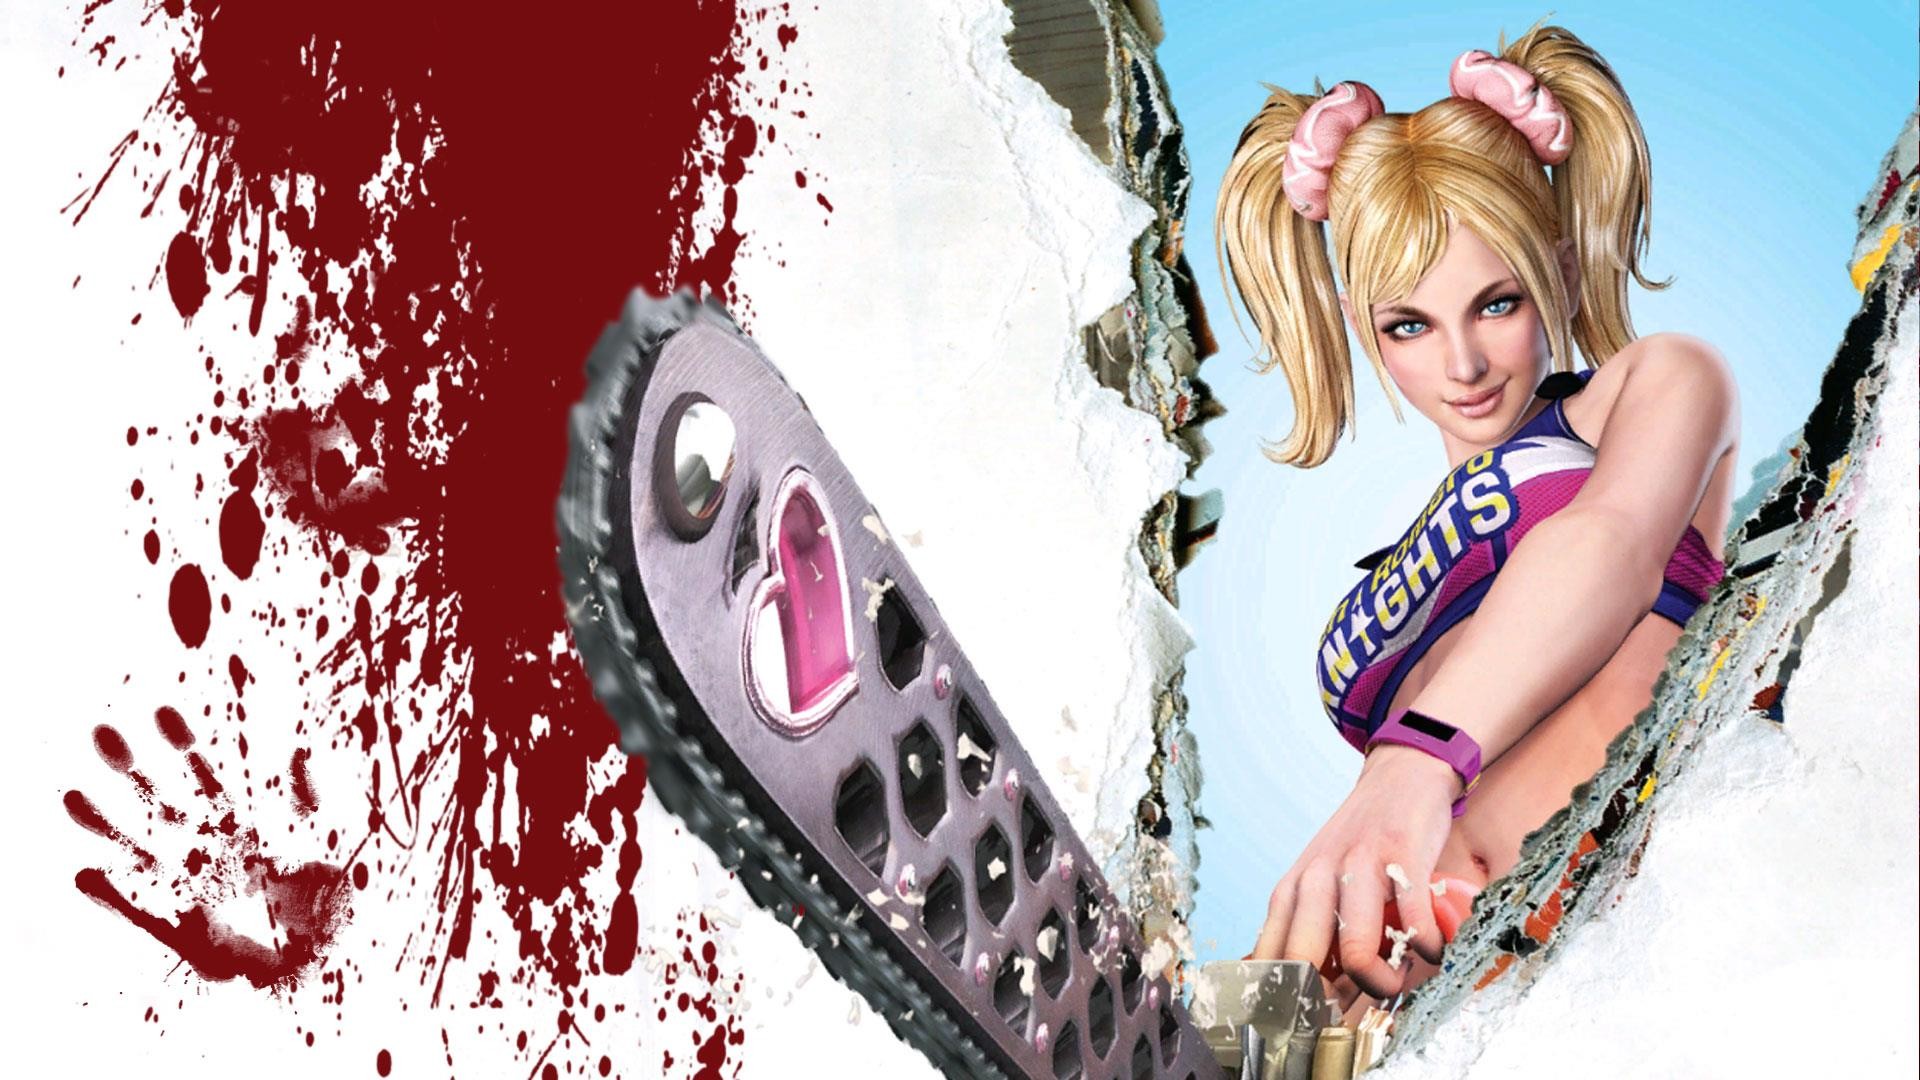 Lollipop Chainsaw RePOP hit with disappointing delay